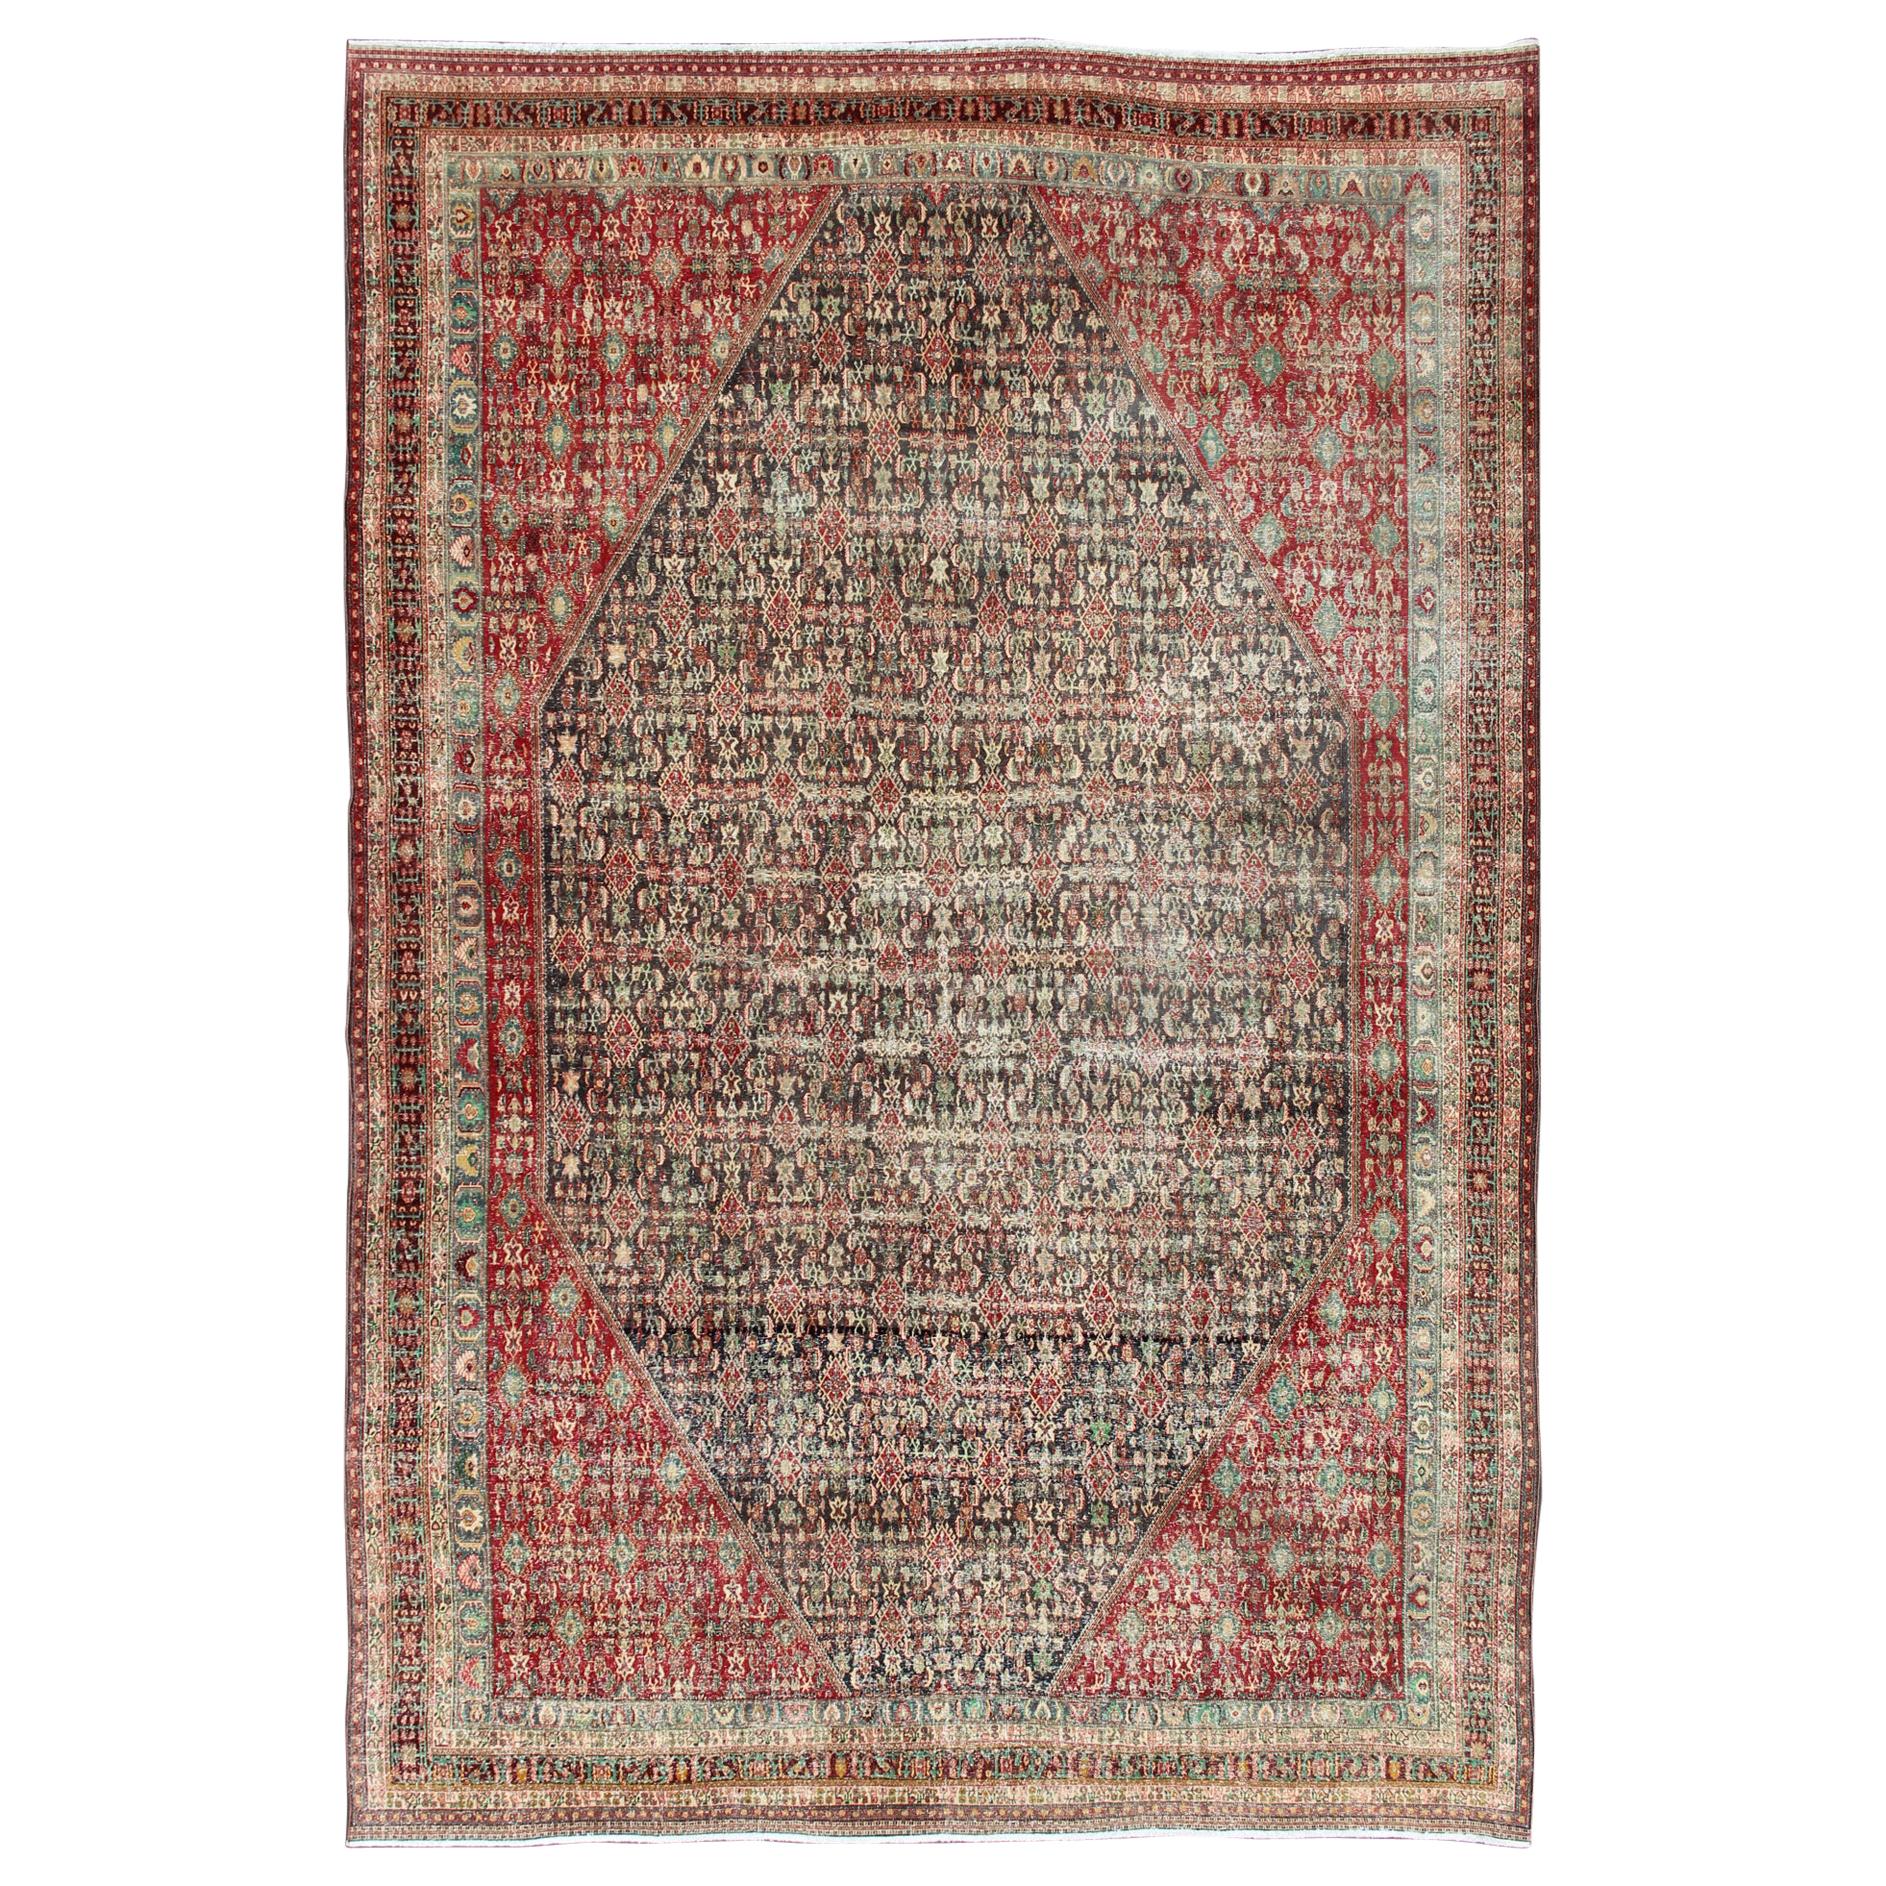 Colorful Large Persian Antique Qashqai rug with A Beautiful Tribal Motif Design